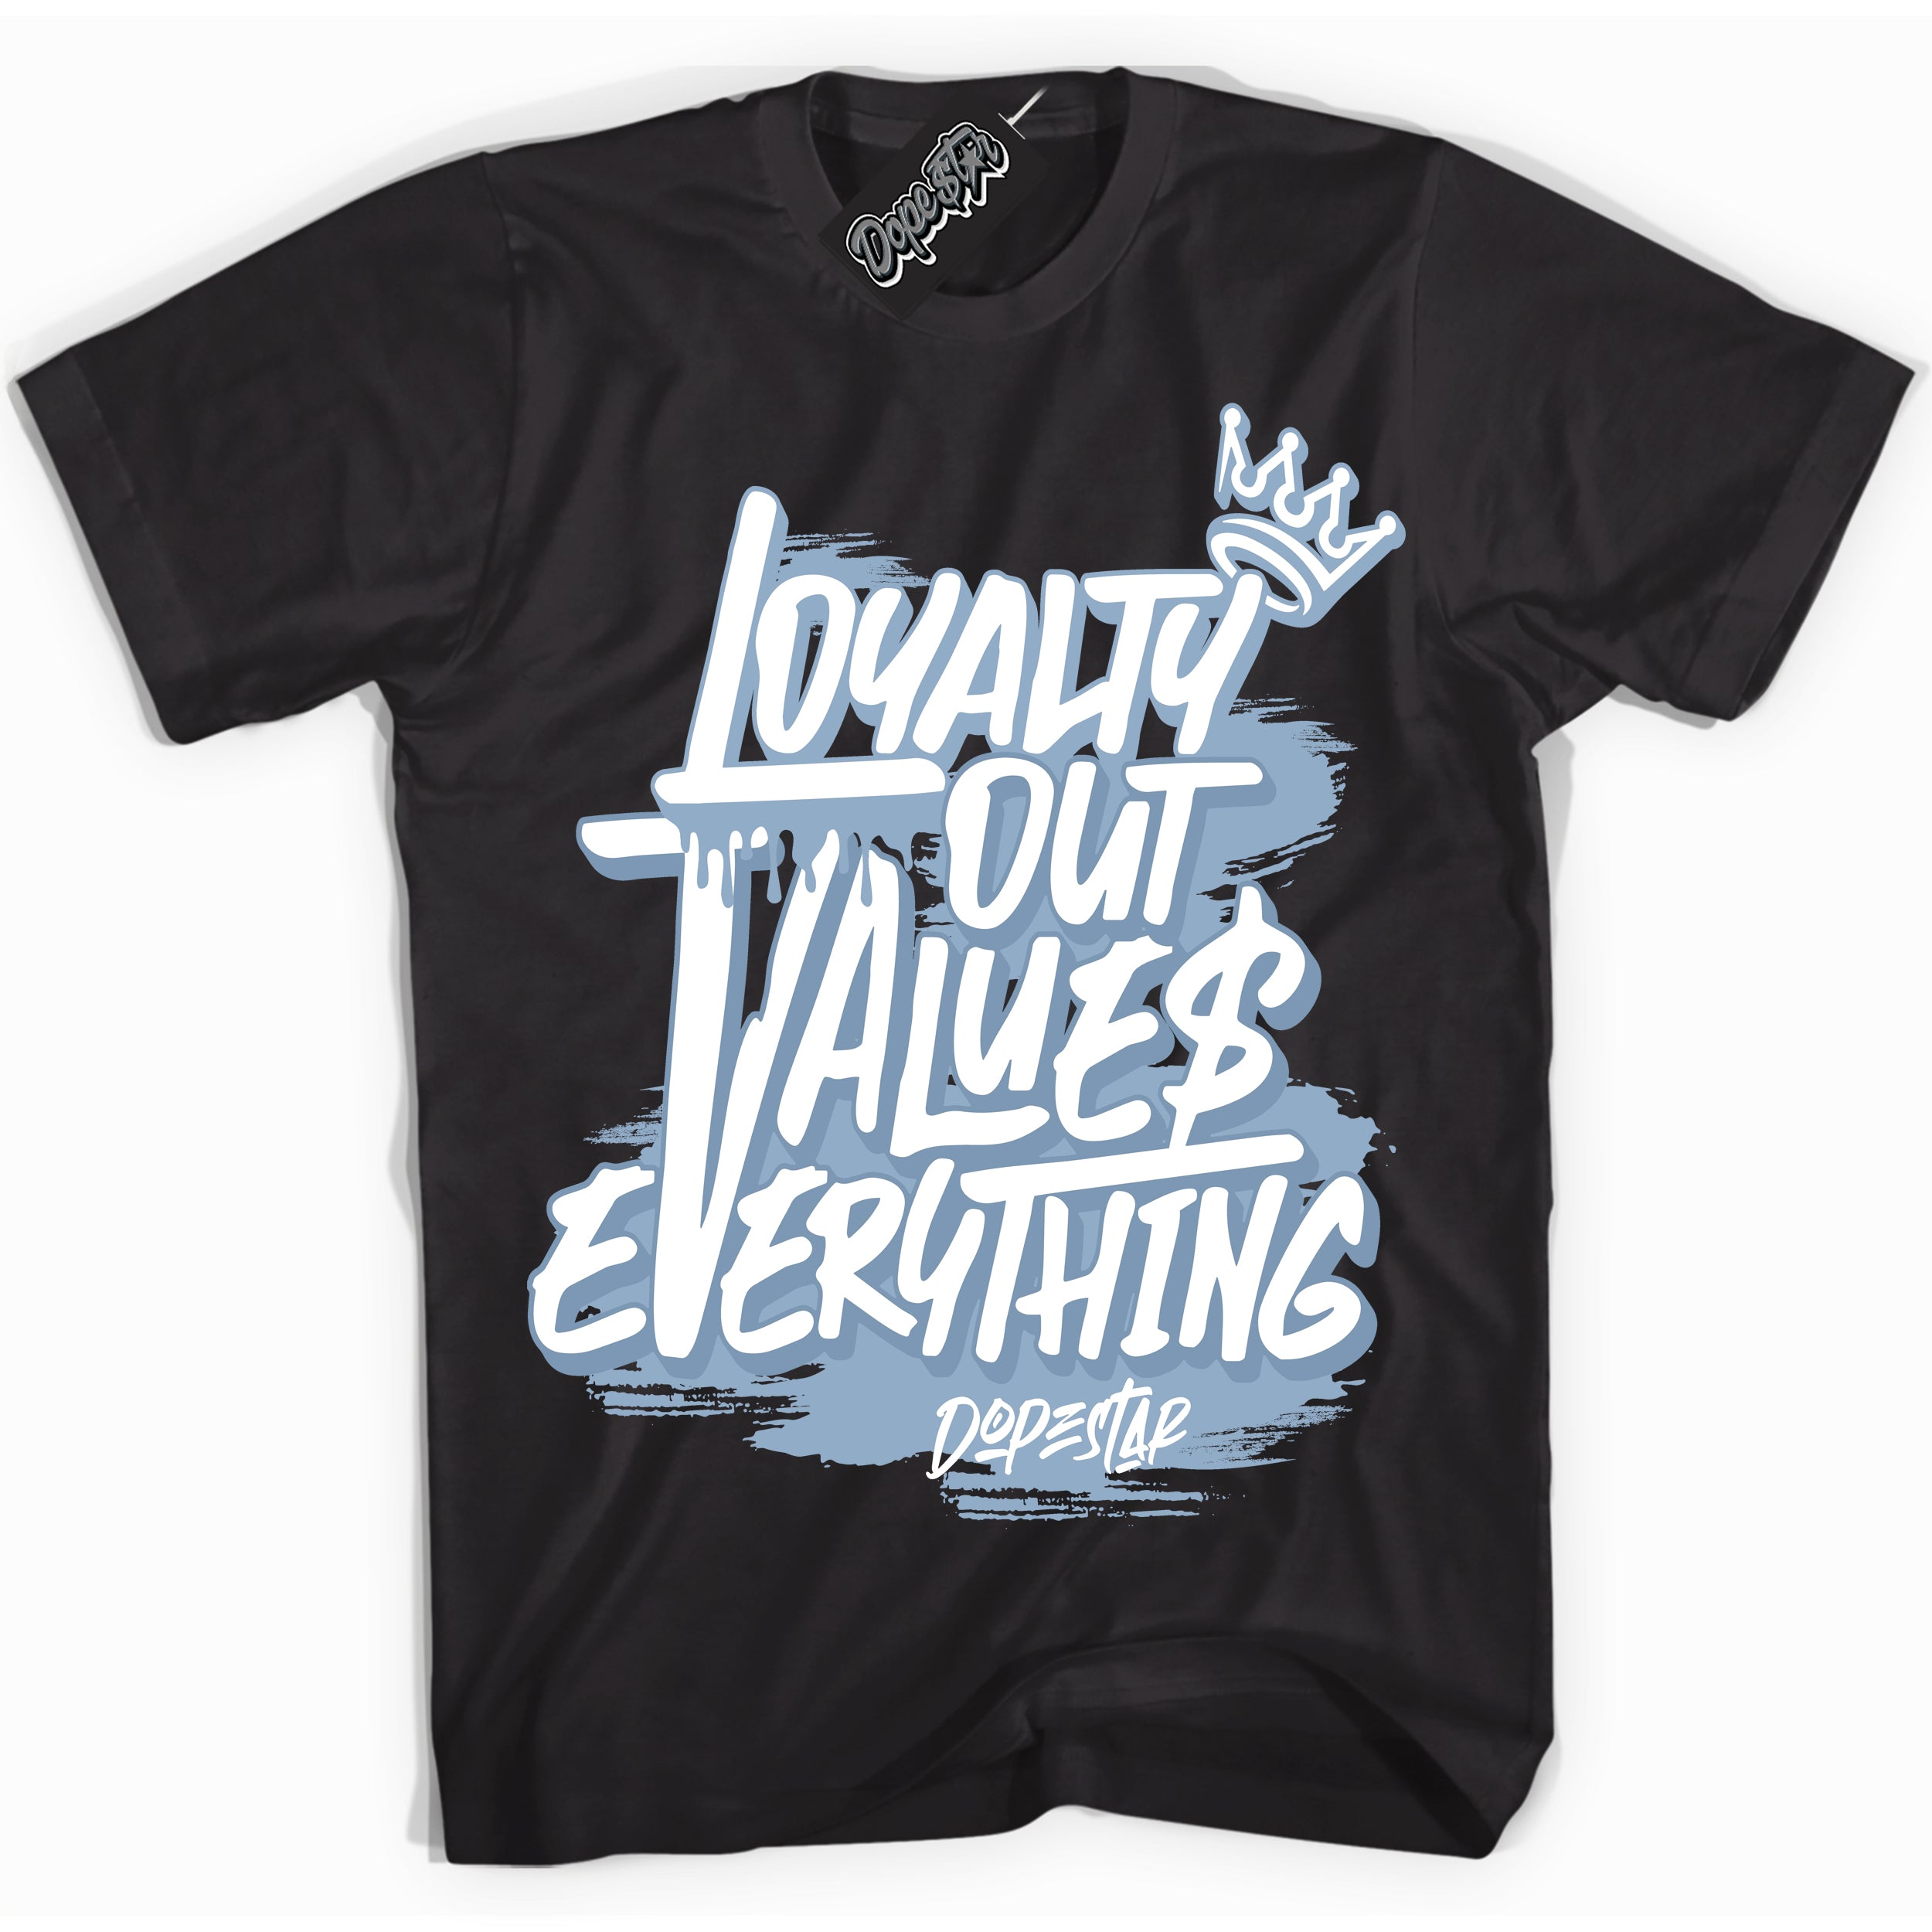 Cool Black Shirt with “ Loyalty Out Values Everything” design that perfectly matches Aluminum 1s Sneakers.